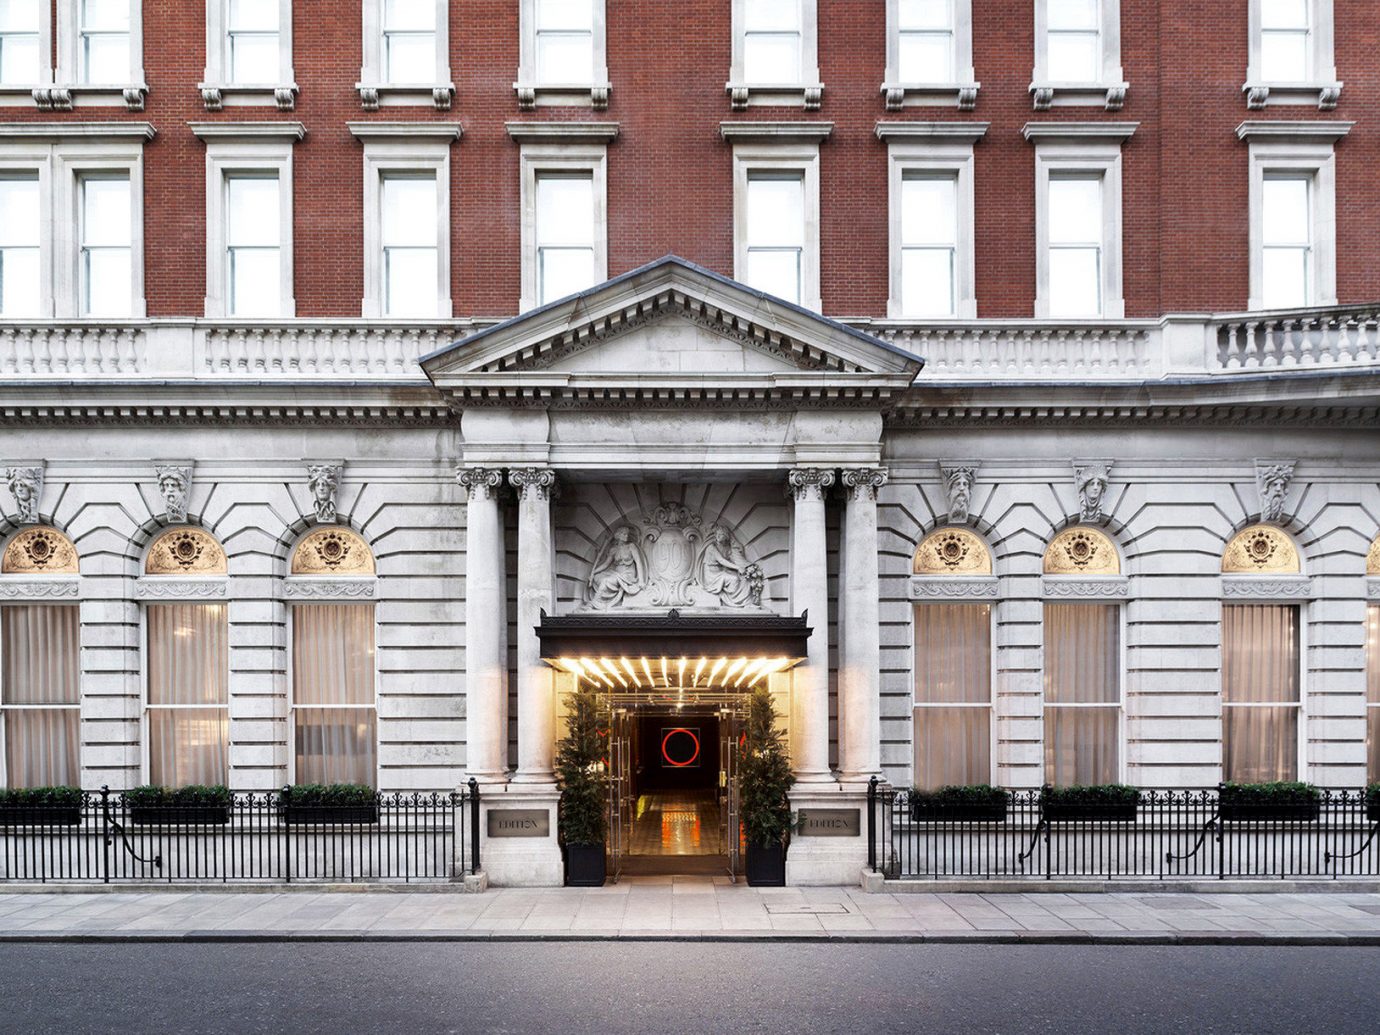 Architecture Boutique Hotels Buildings Exterior Historic London Romantic Hotels building outdoor facade palace government building tourist attraction synagogue tall stone